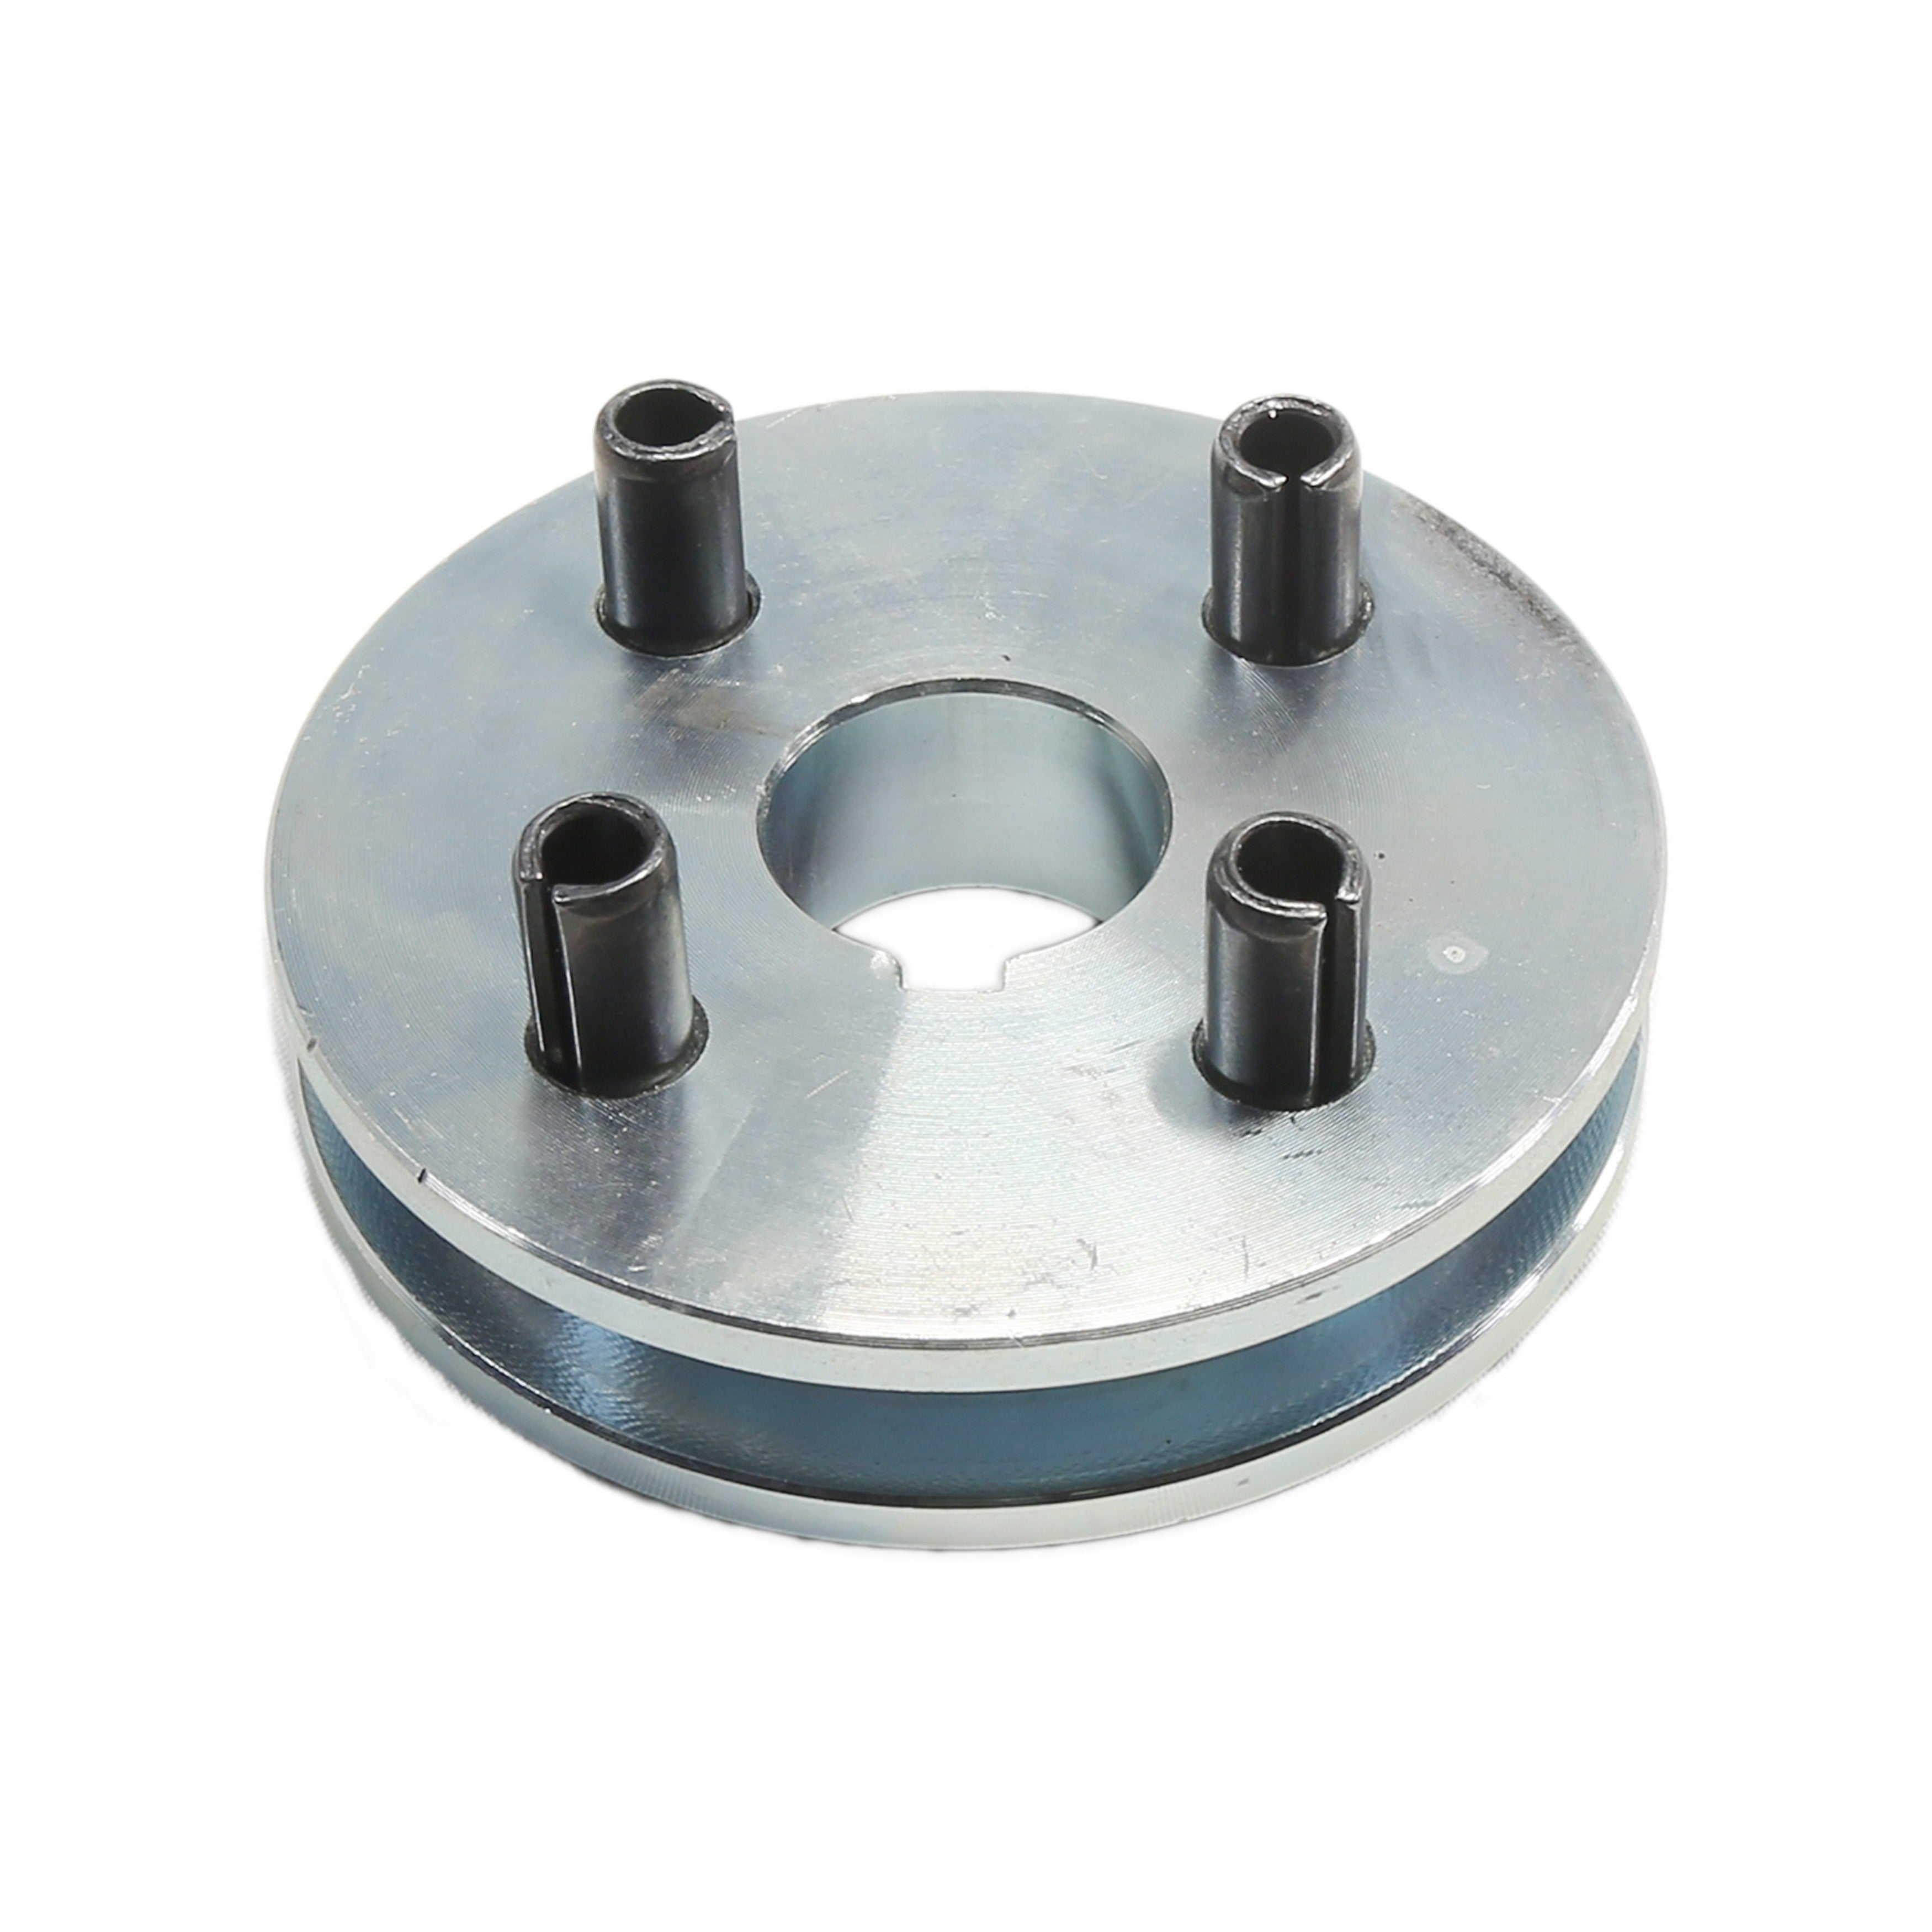 Linear  2110-131 Shifter Block with Pins